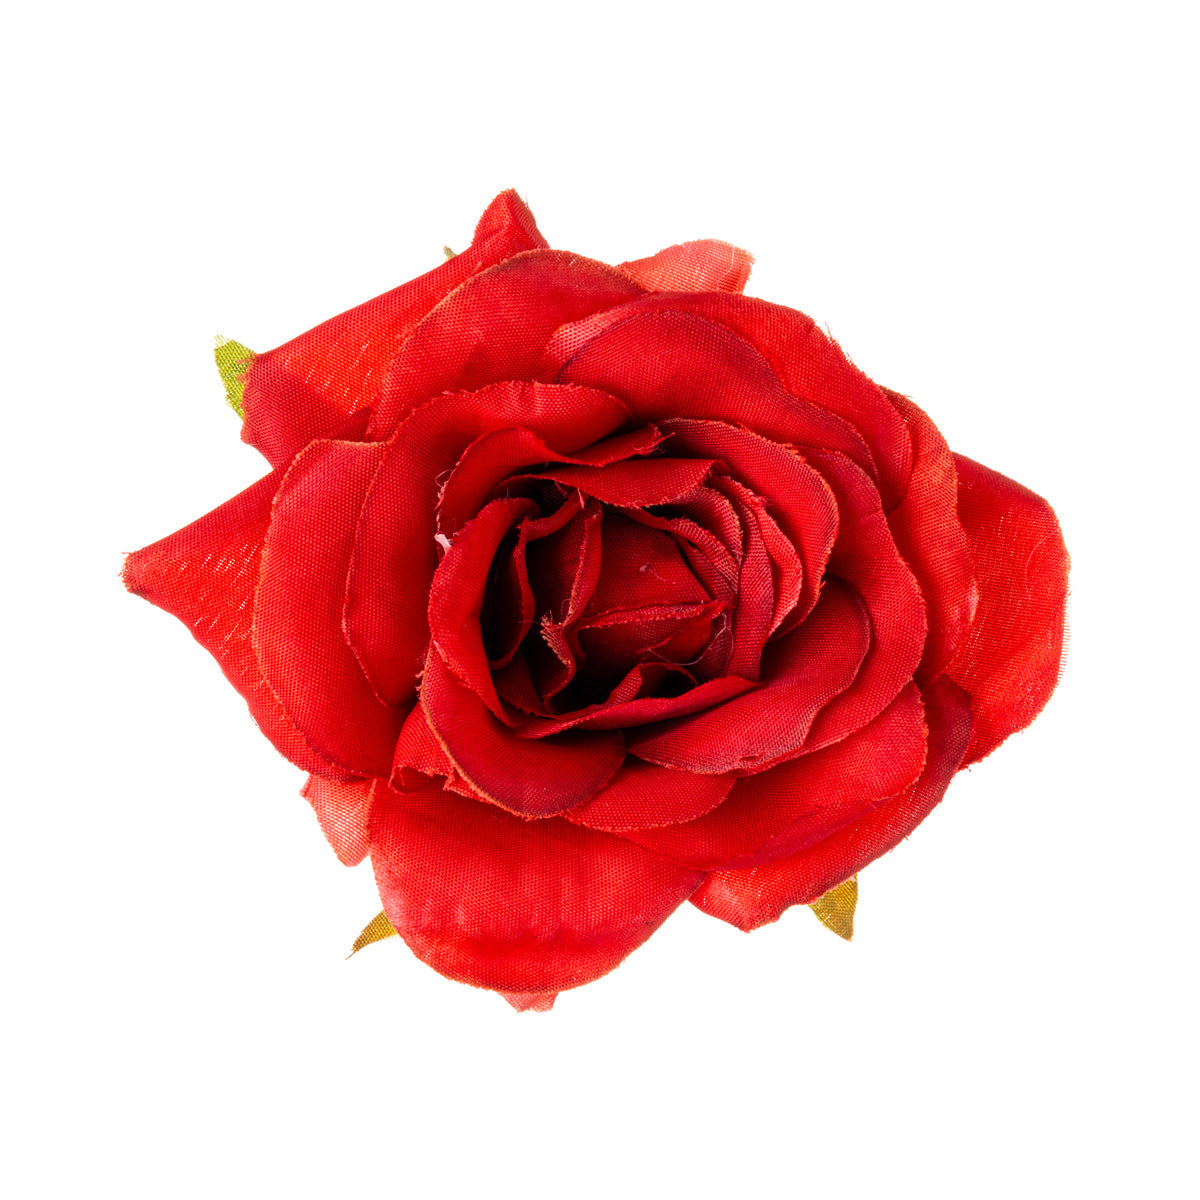 Small rose for hair / accessory flower 7cm